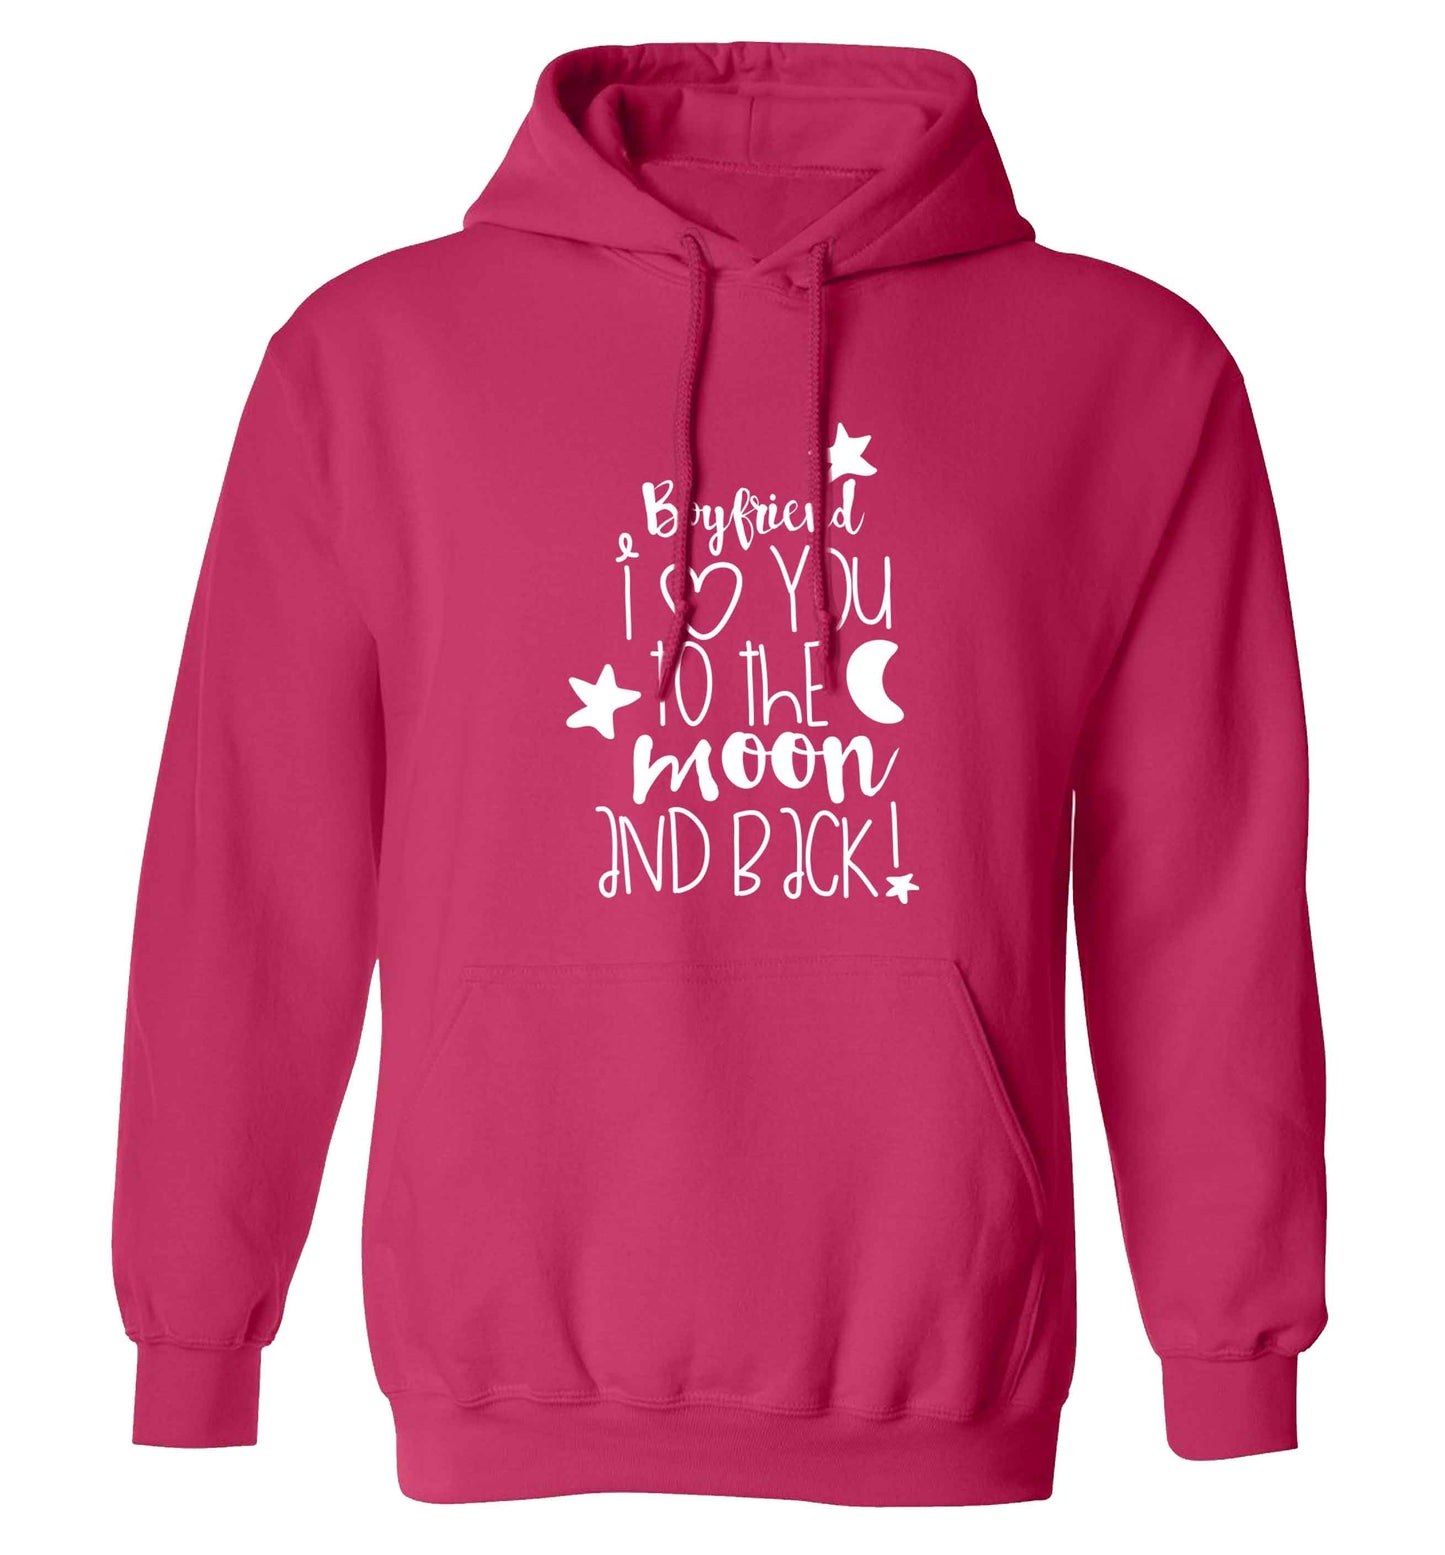 Boyfriend I love you to the moon and back adults unisex pink hoodie 2XL